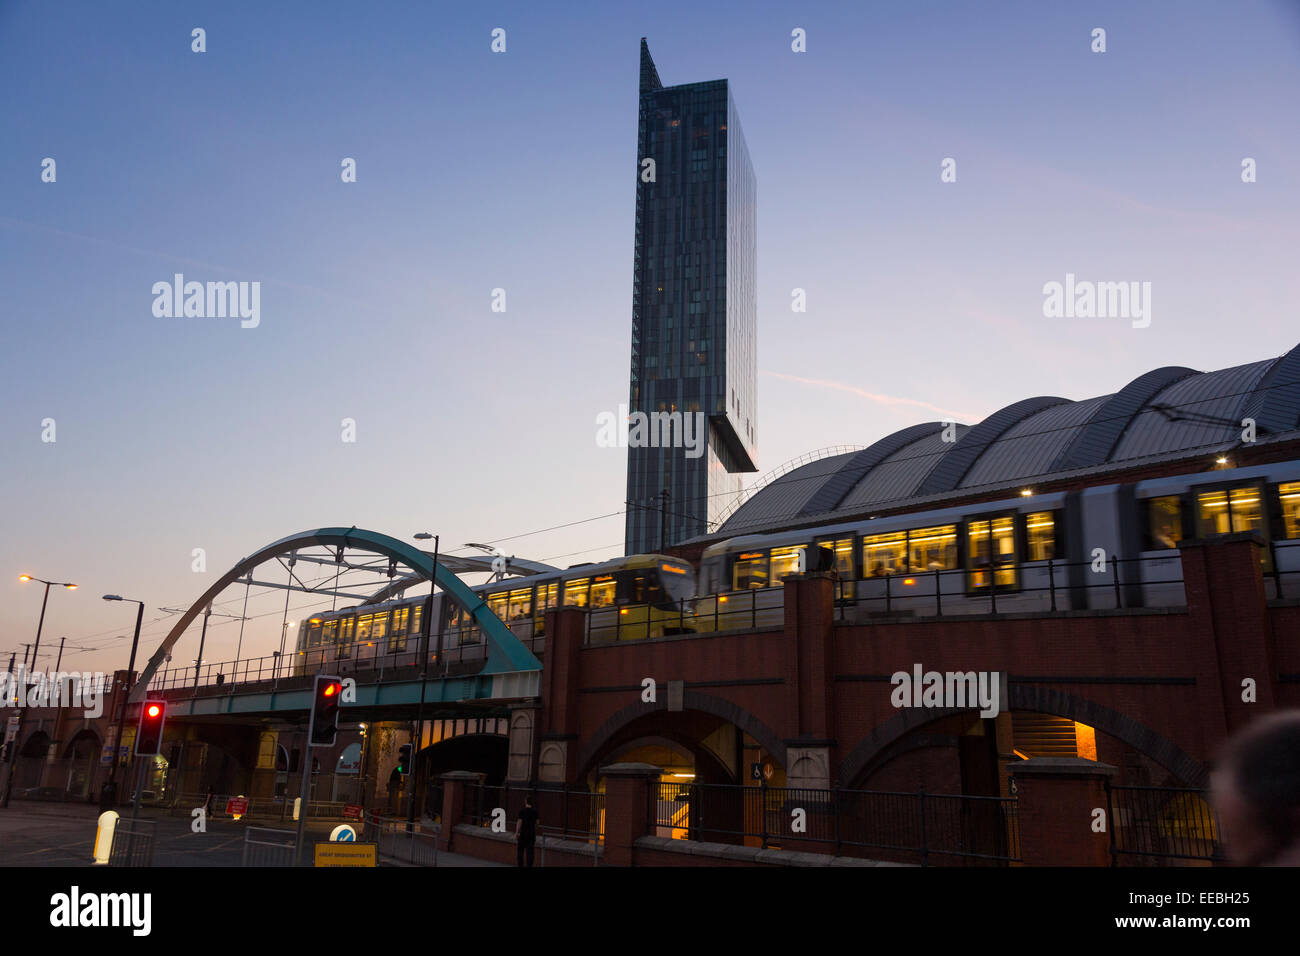 England, Manchester, Metrolink tram, Manchester Convention Centre and Beetham Tower at twilight Stock Photo